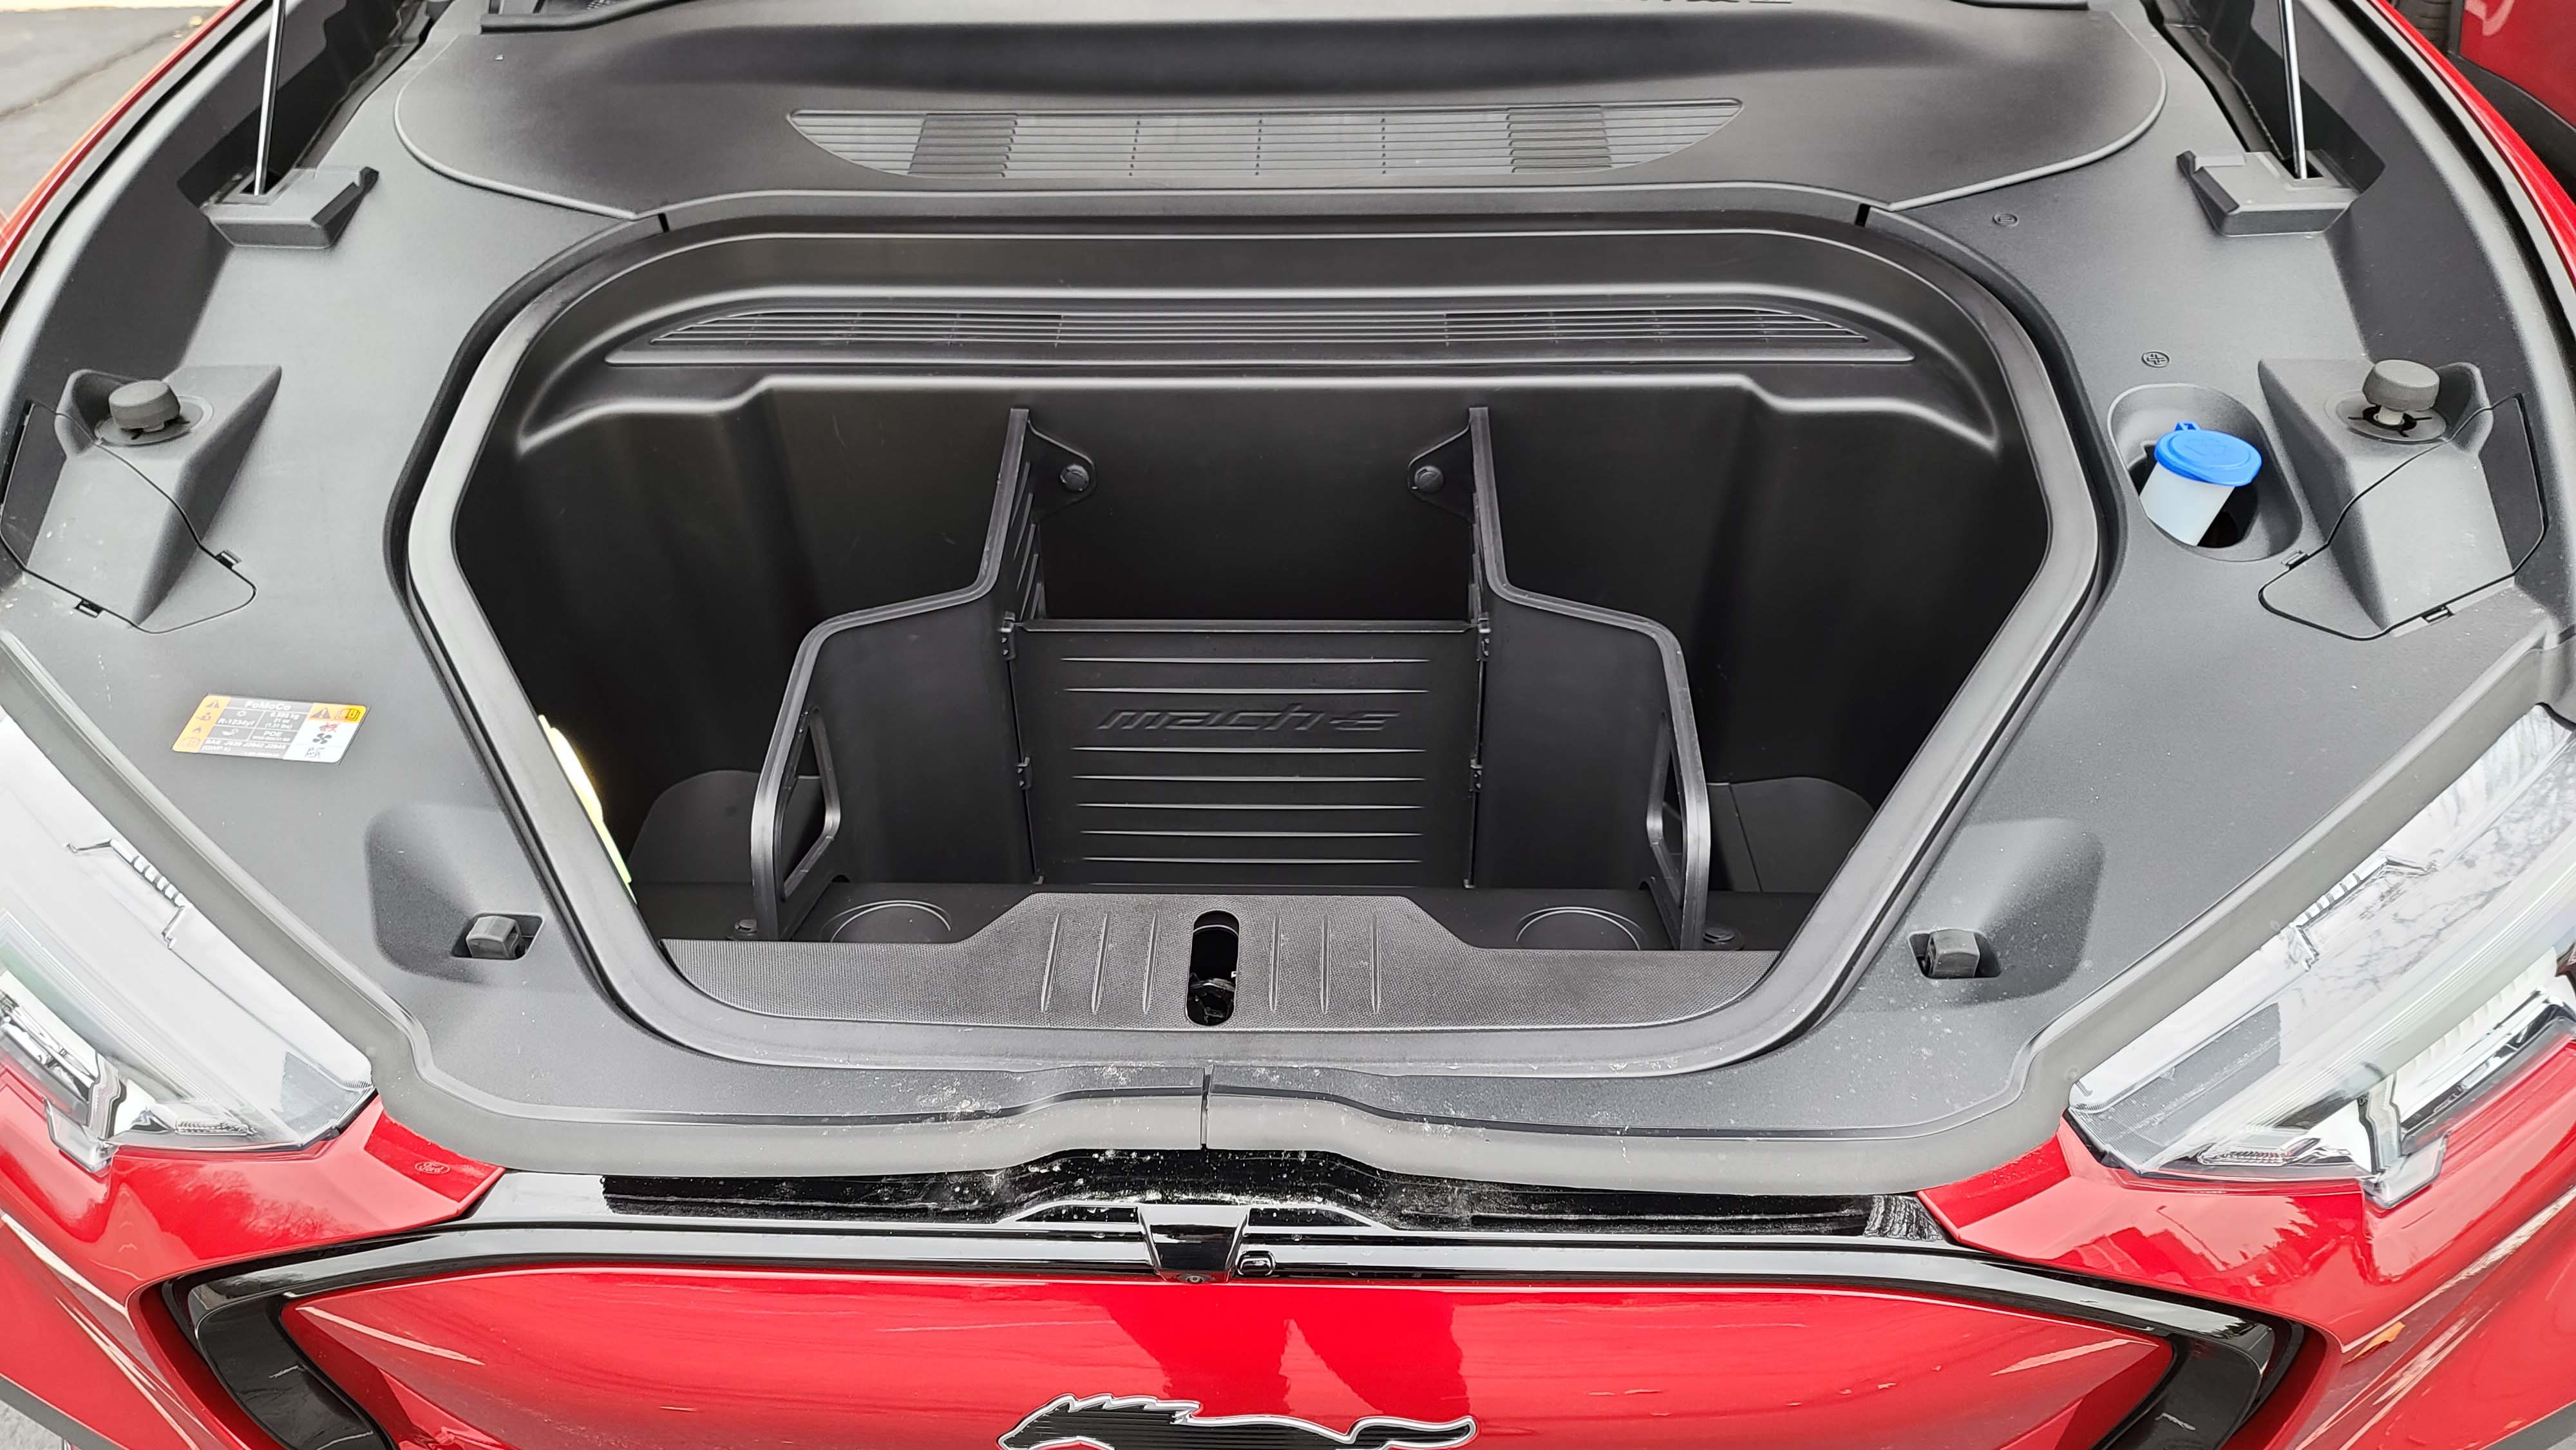 The "frunk" of the 2021 Ford Mustang Mach-E comes with storage dividers.